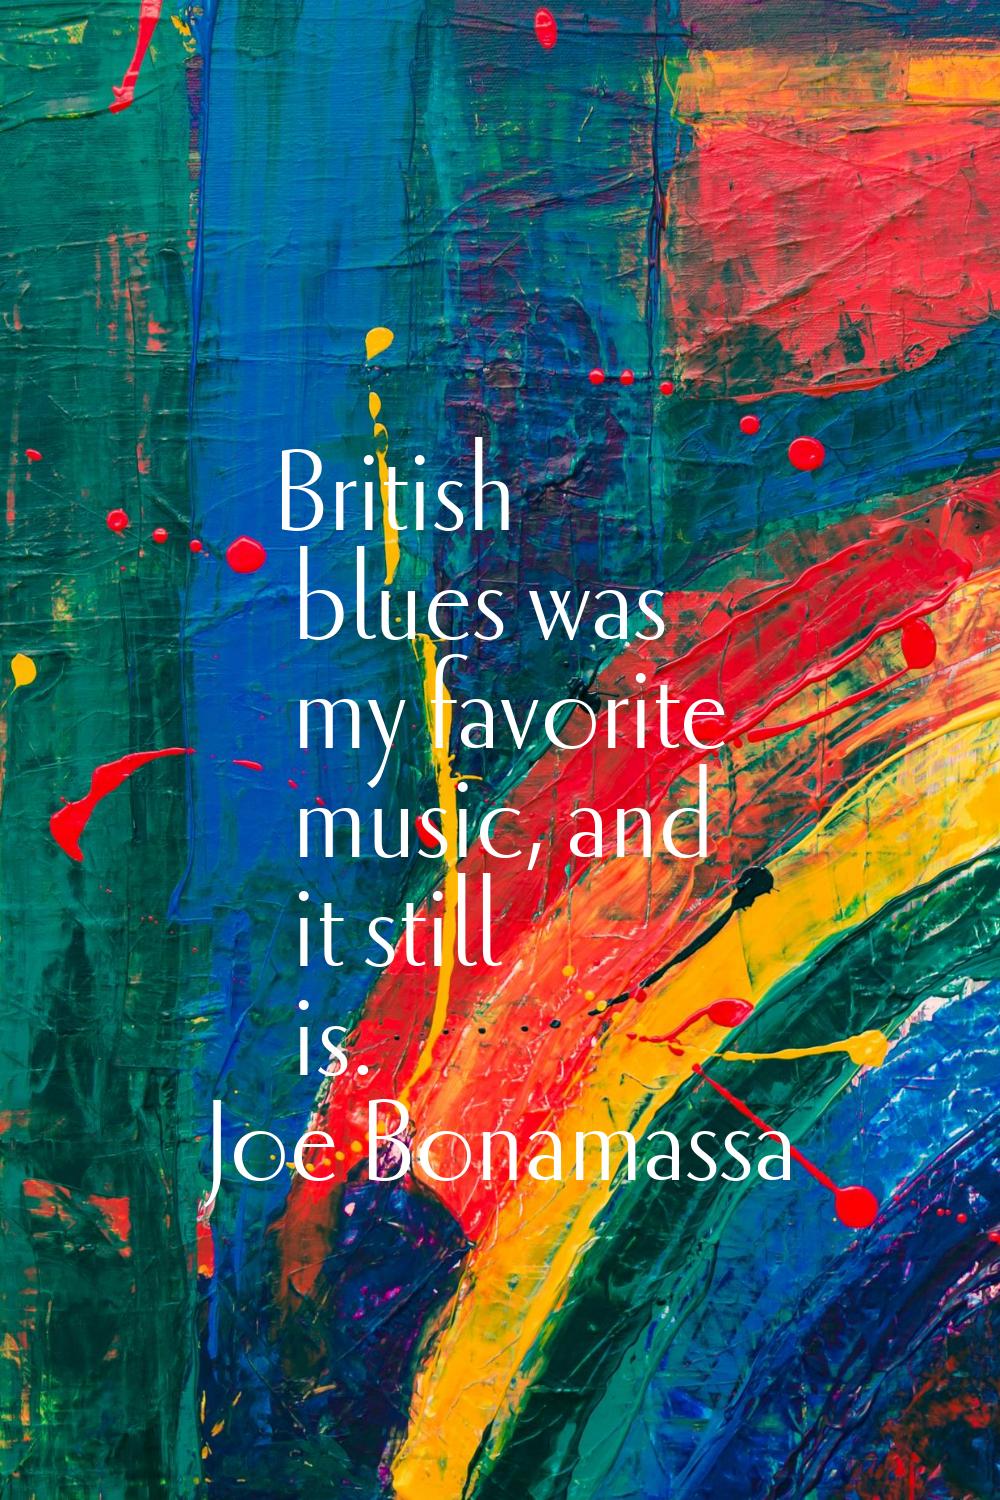 British blues was my favorite music, and it still is.